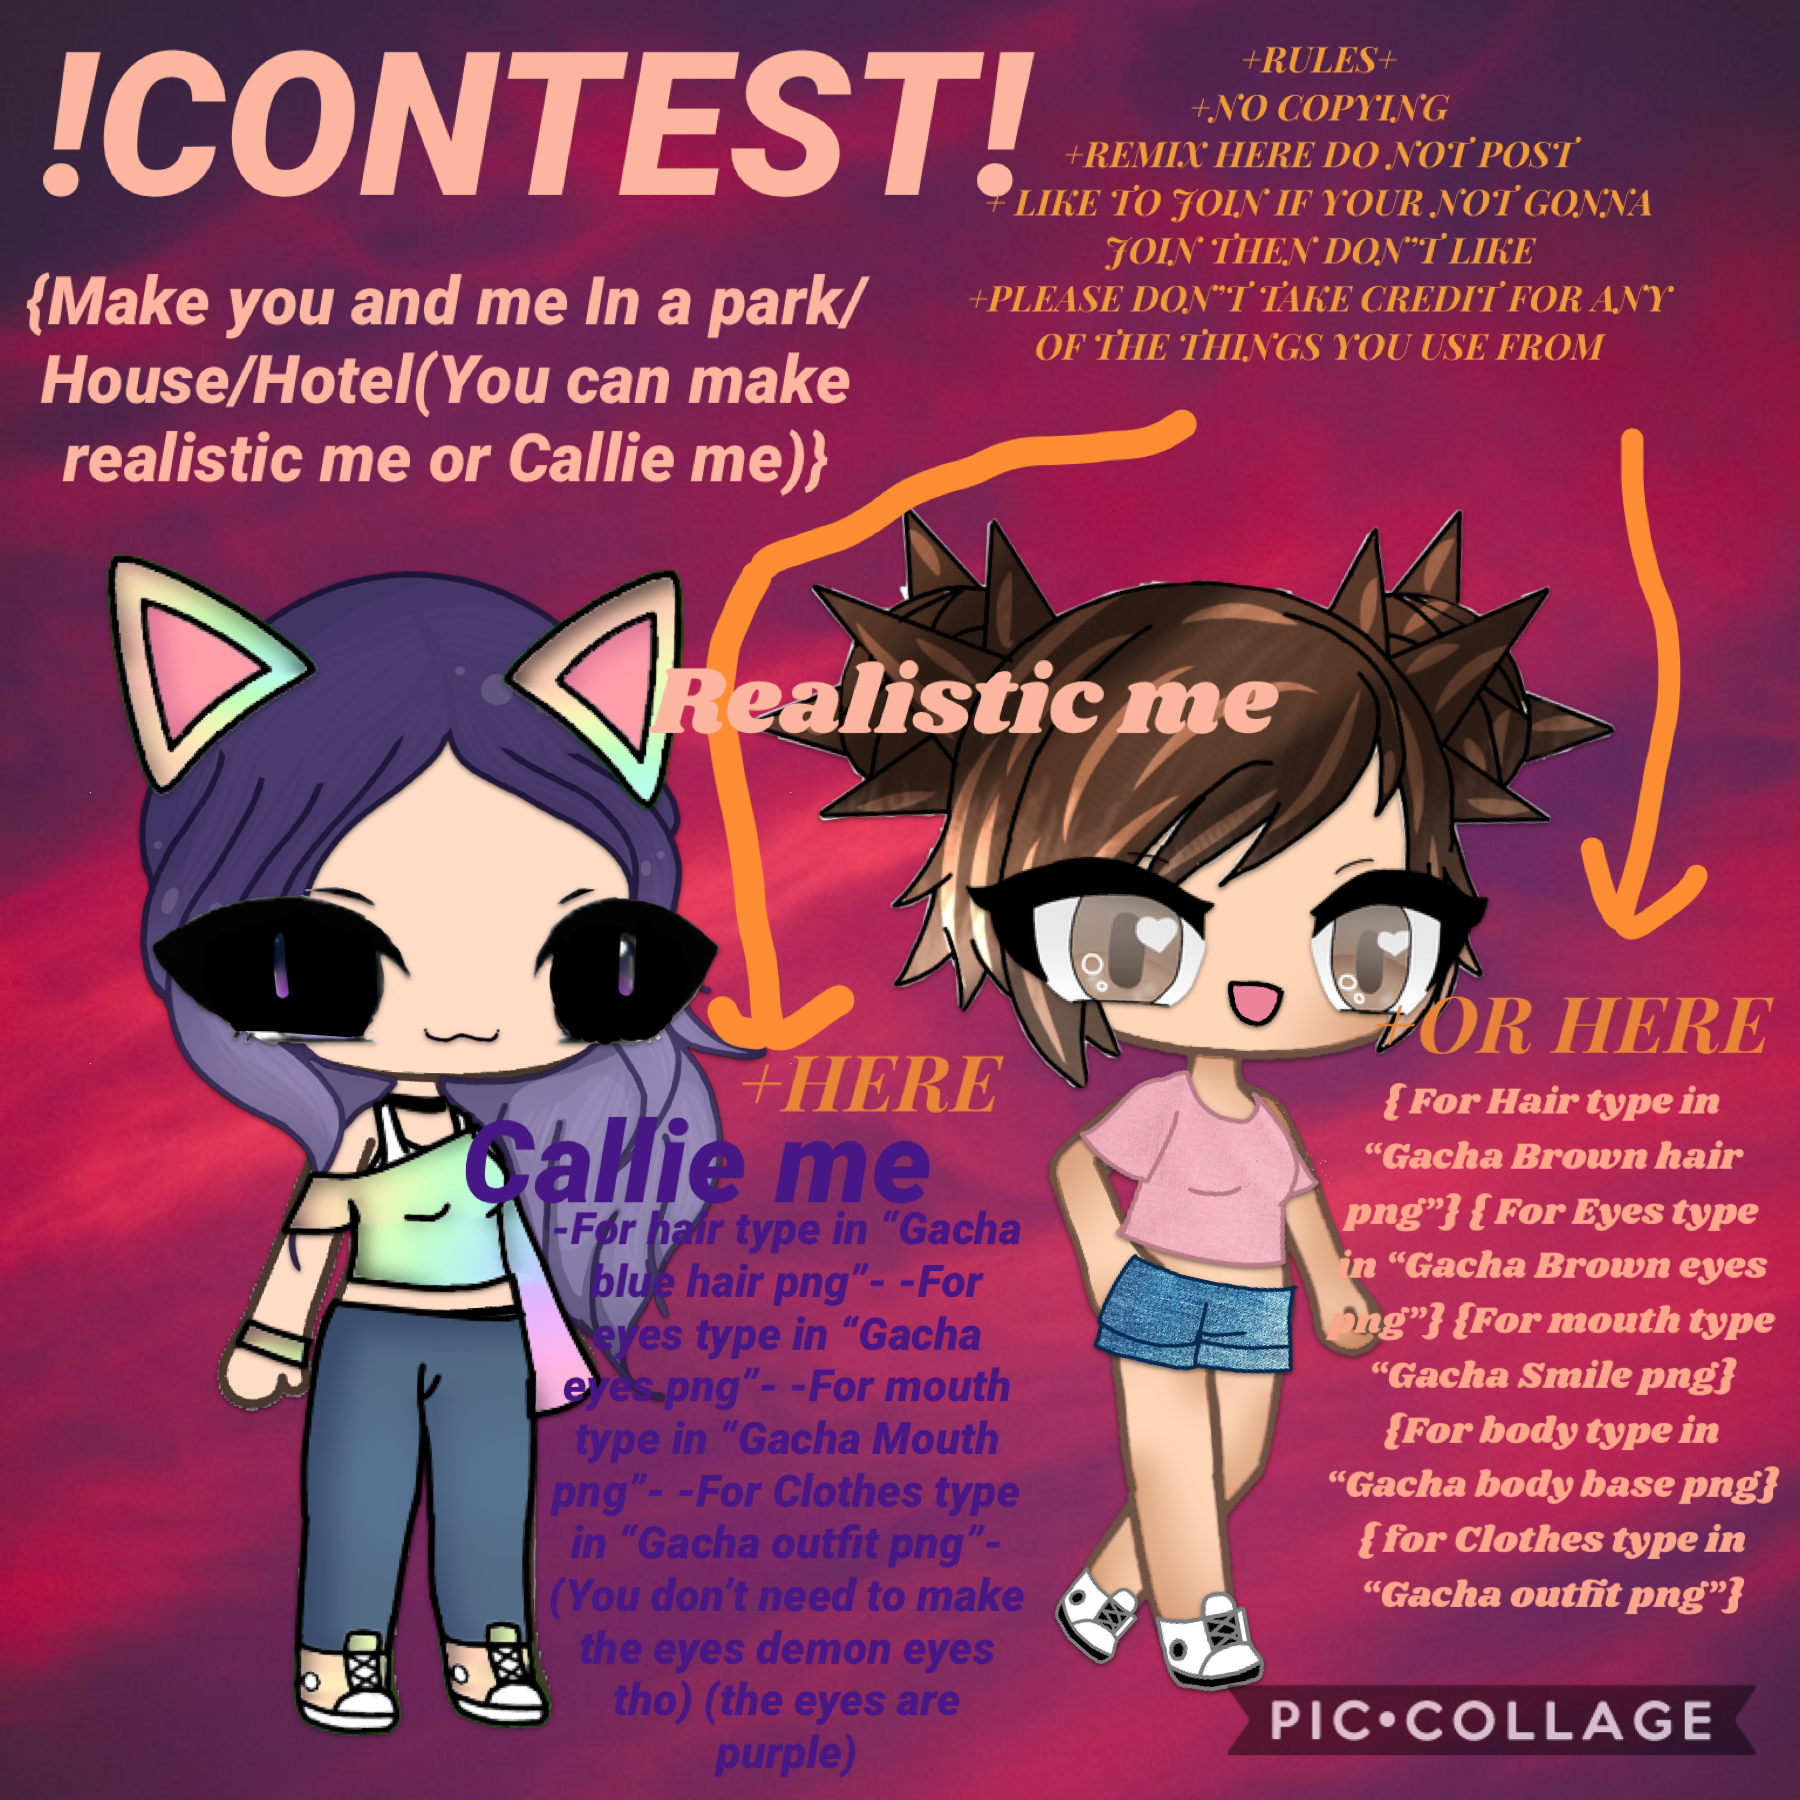 Contest Tap This text
Due date is 11/20/2020